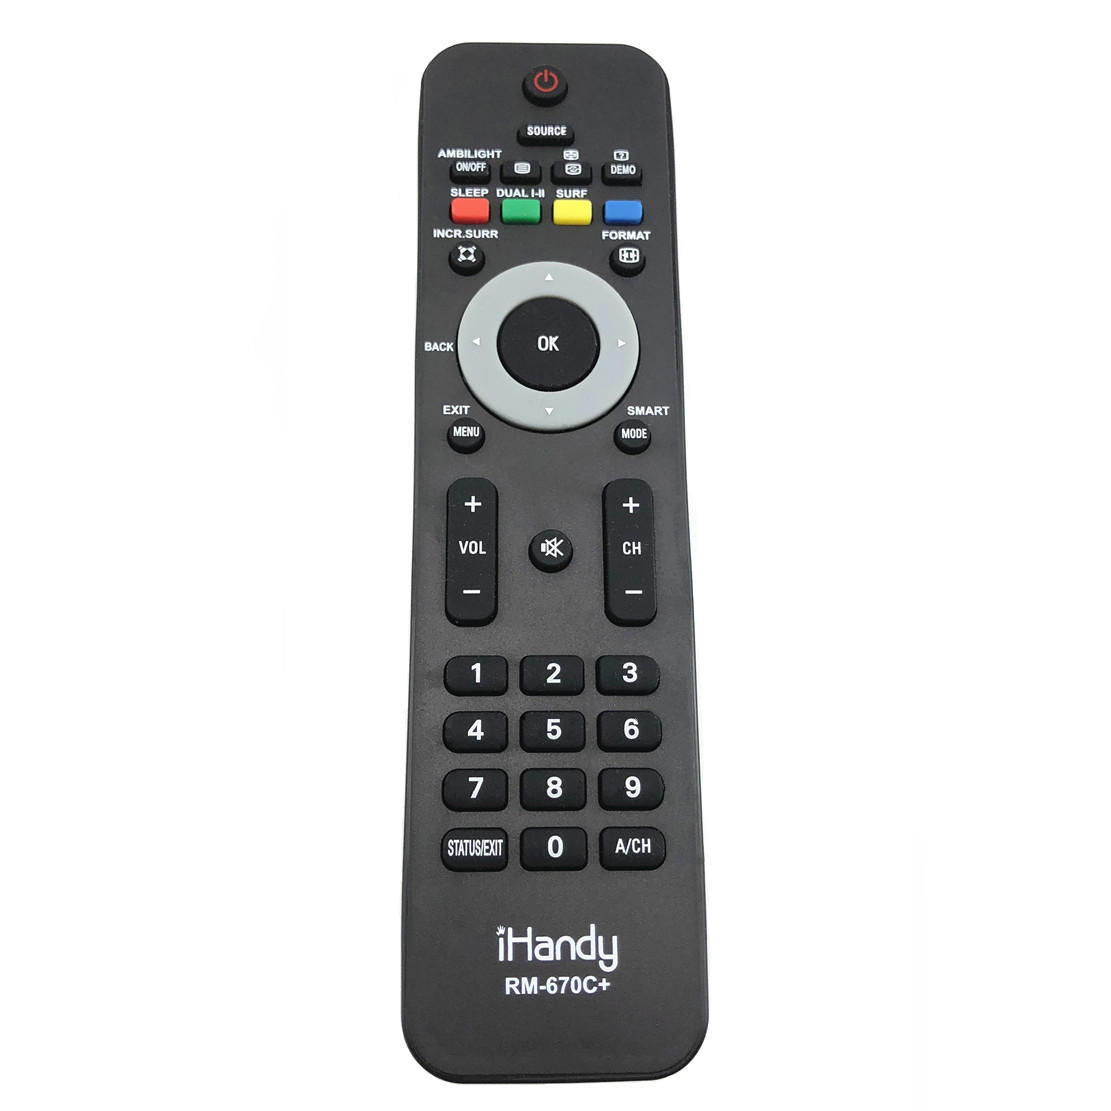 

HUAYU TV Remote Control for Philips TV RC7807 RC7952 RM-670C